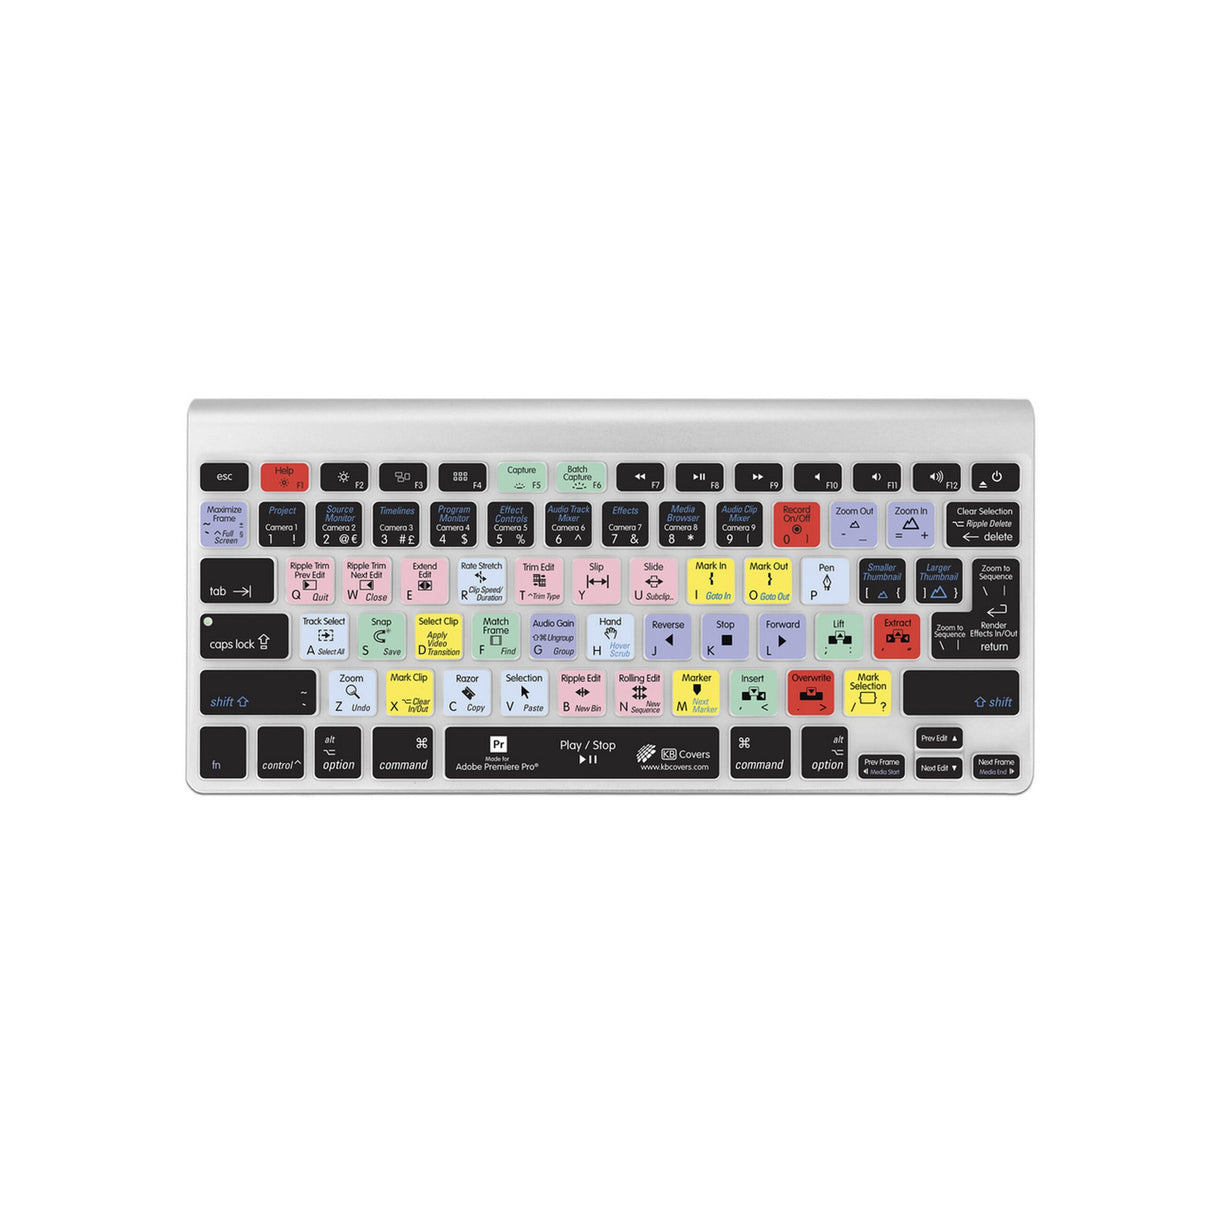 KB Covers PR-M-CC-2 Premiere Pro Keyboard Cover for MacBook/Air 13/Pro 2008+/Retina and Wireless